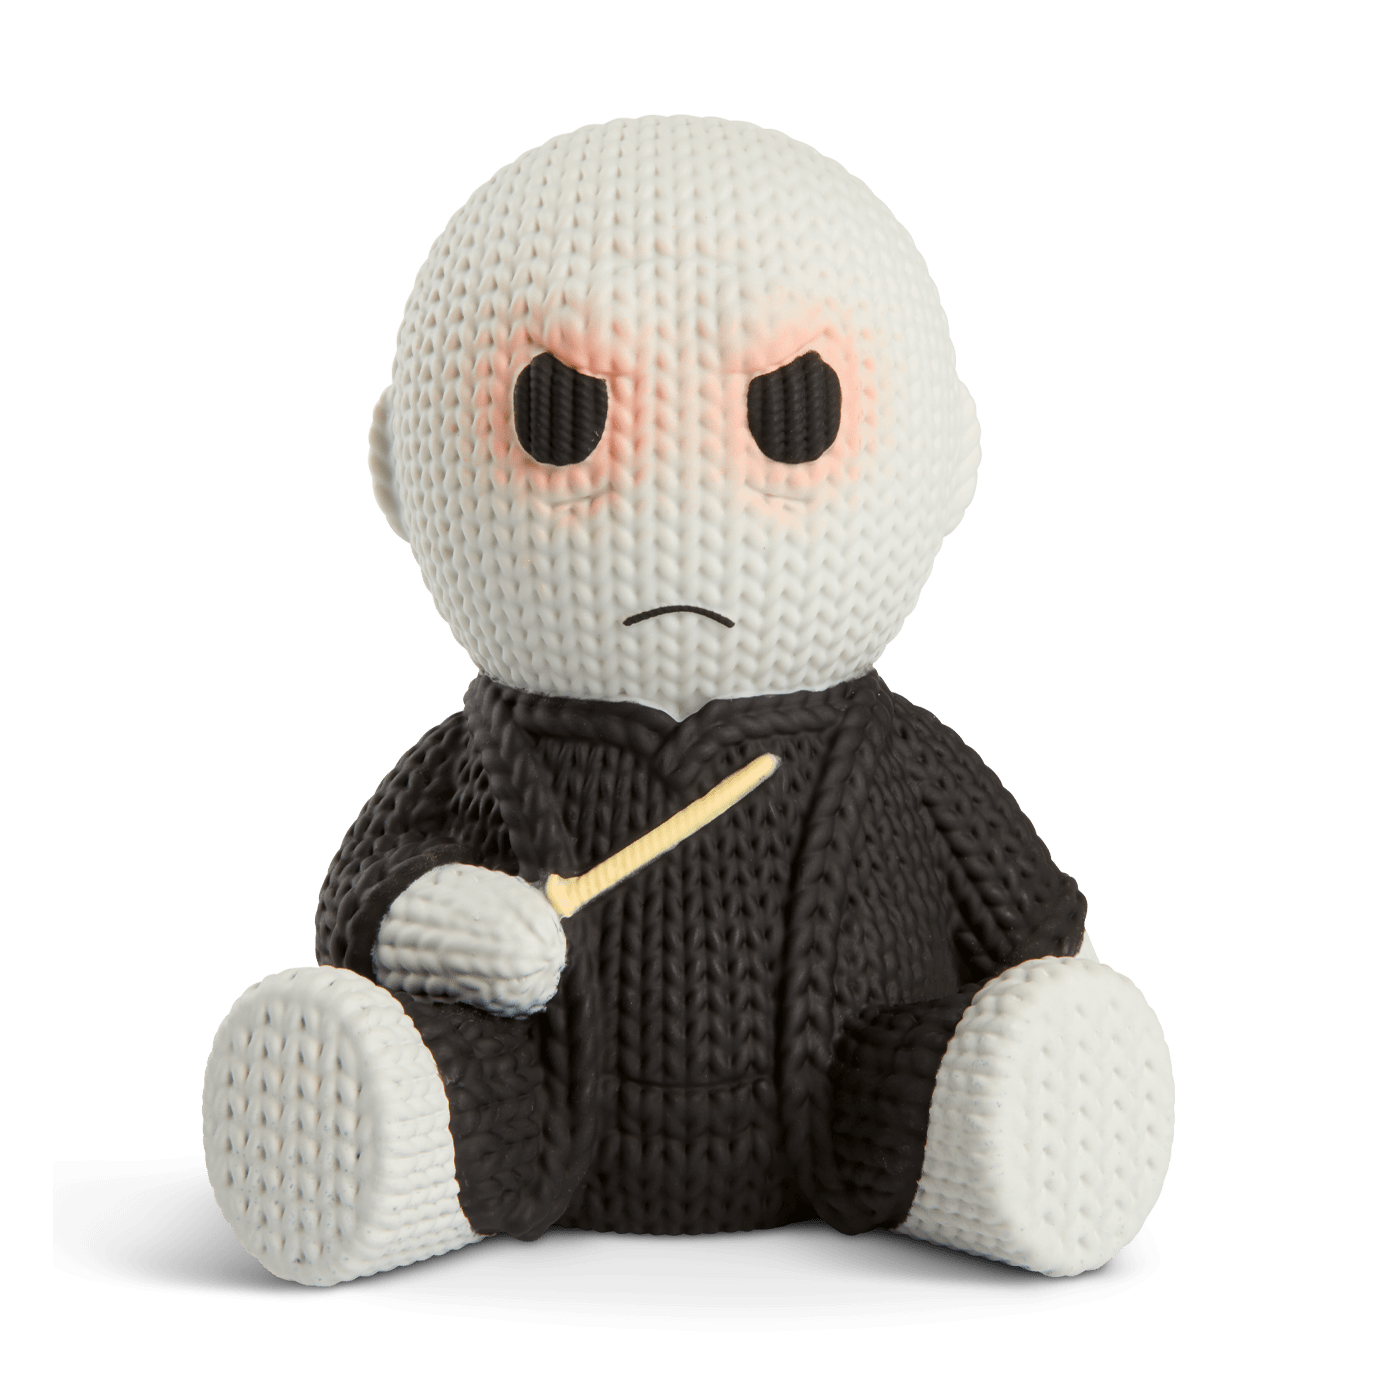 Lord Voldemort #066 - Harry Potter - Handmade by Robots